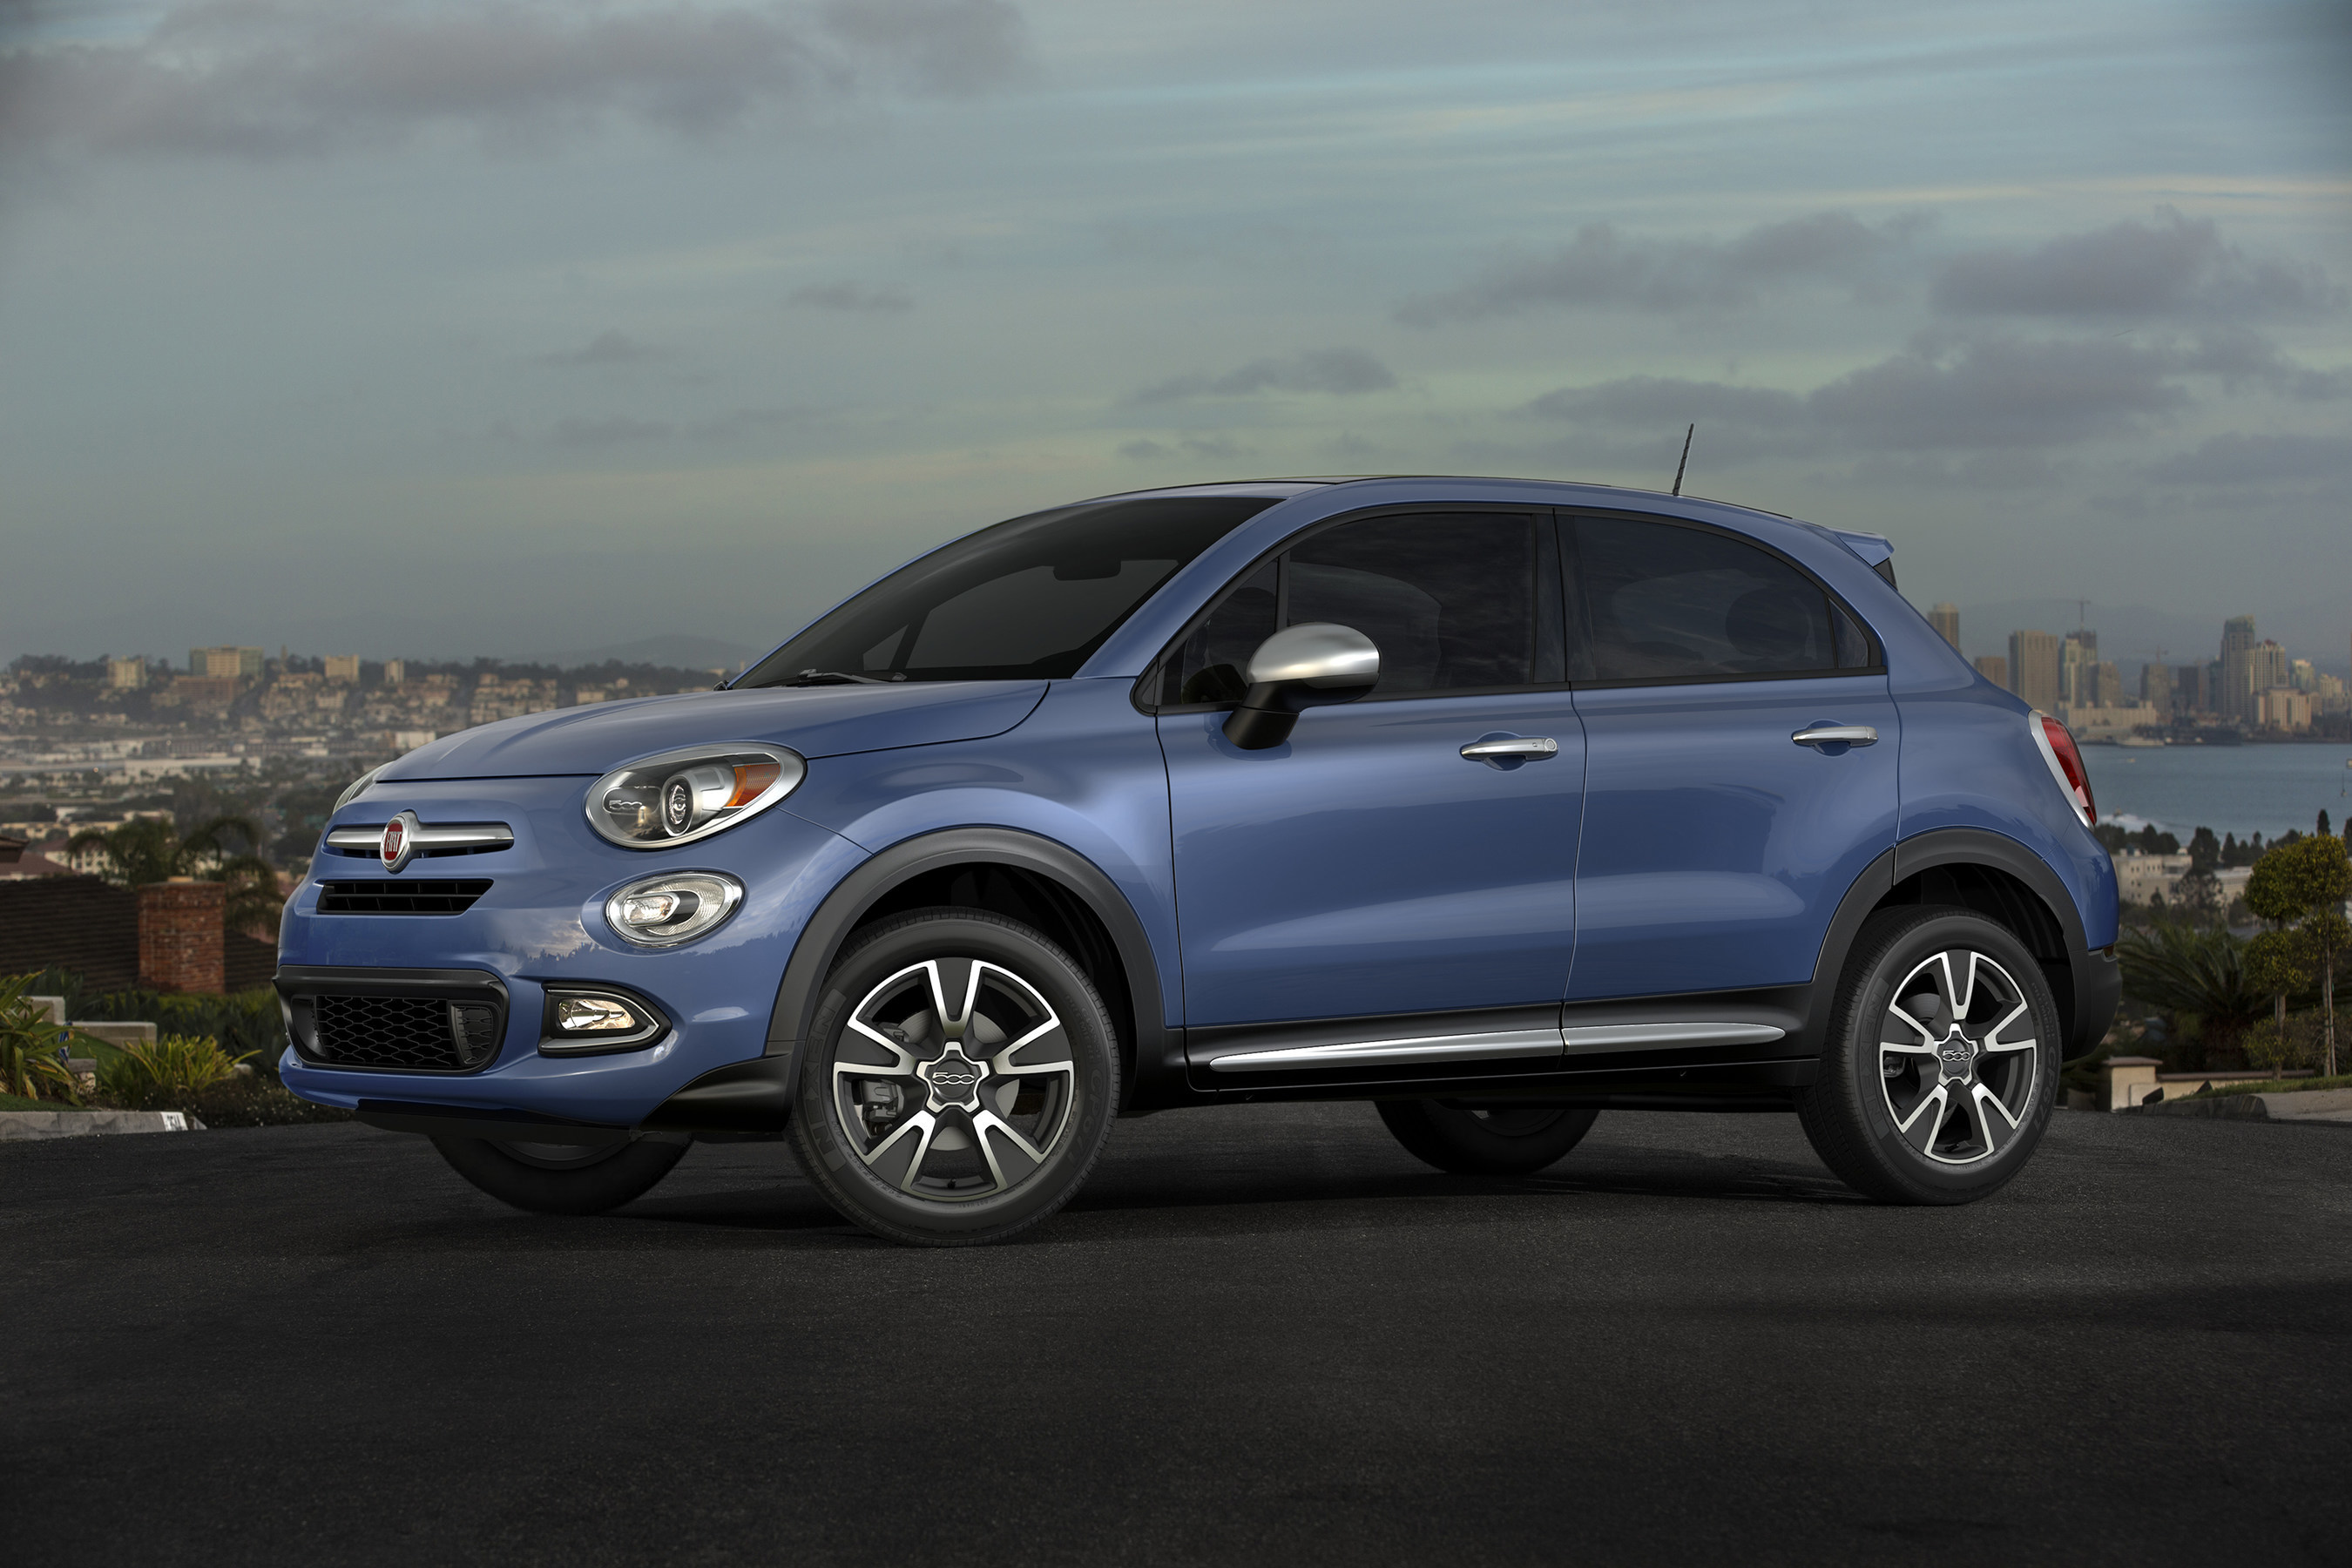 Fiat Brand Announces New Blue Sky Edition For 2018 Fiat 500x Models